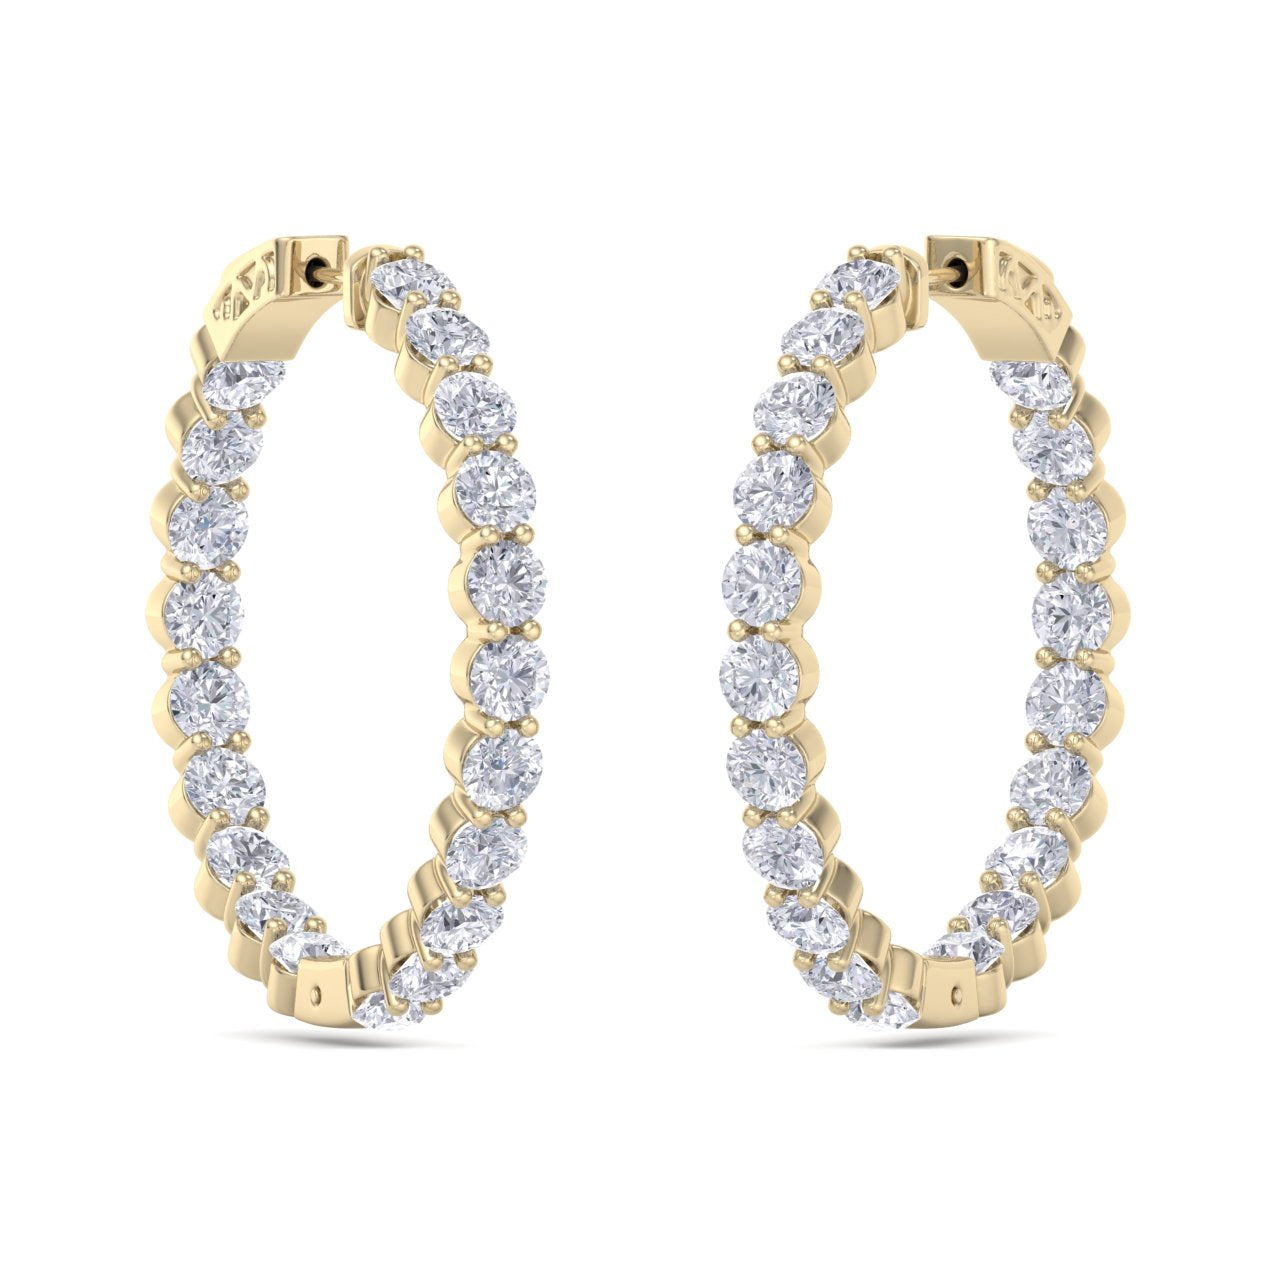 Hoop earrings in rose gold with white diamonds of 7.46 ct in weight